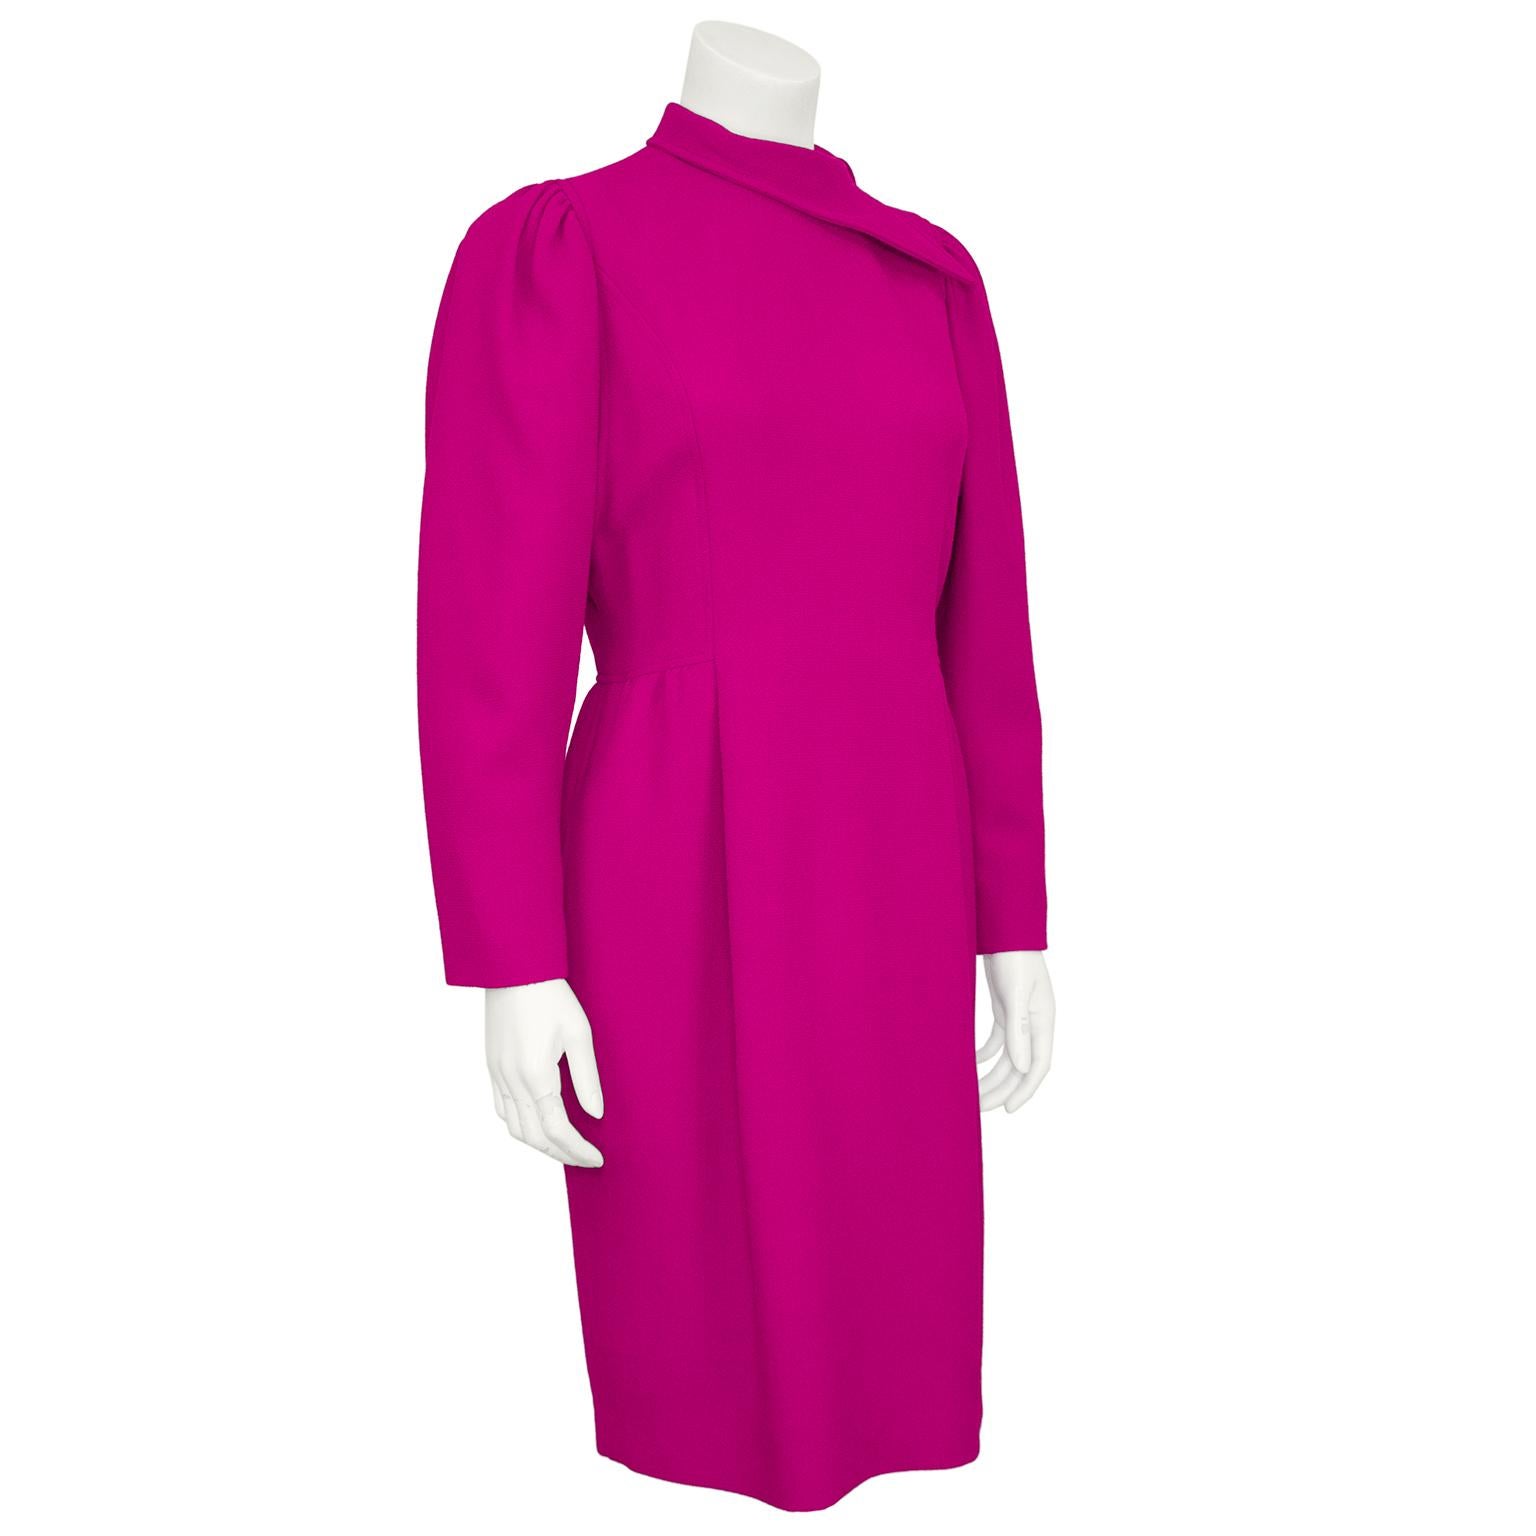 Beautiful Oscar de la Renta magenta wool cocktail dress from the 1990s. The dress features an interesting elongated sideways collar that gives the illusion of a scarf tied at the neck. Long gathered dolman sleeves and fitted through body with a